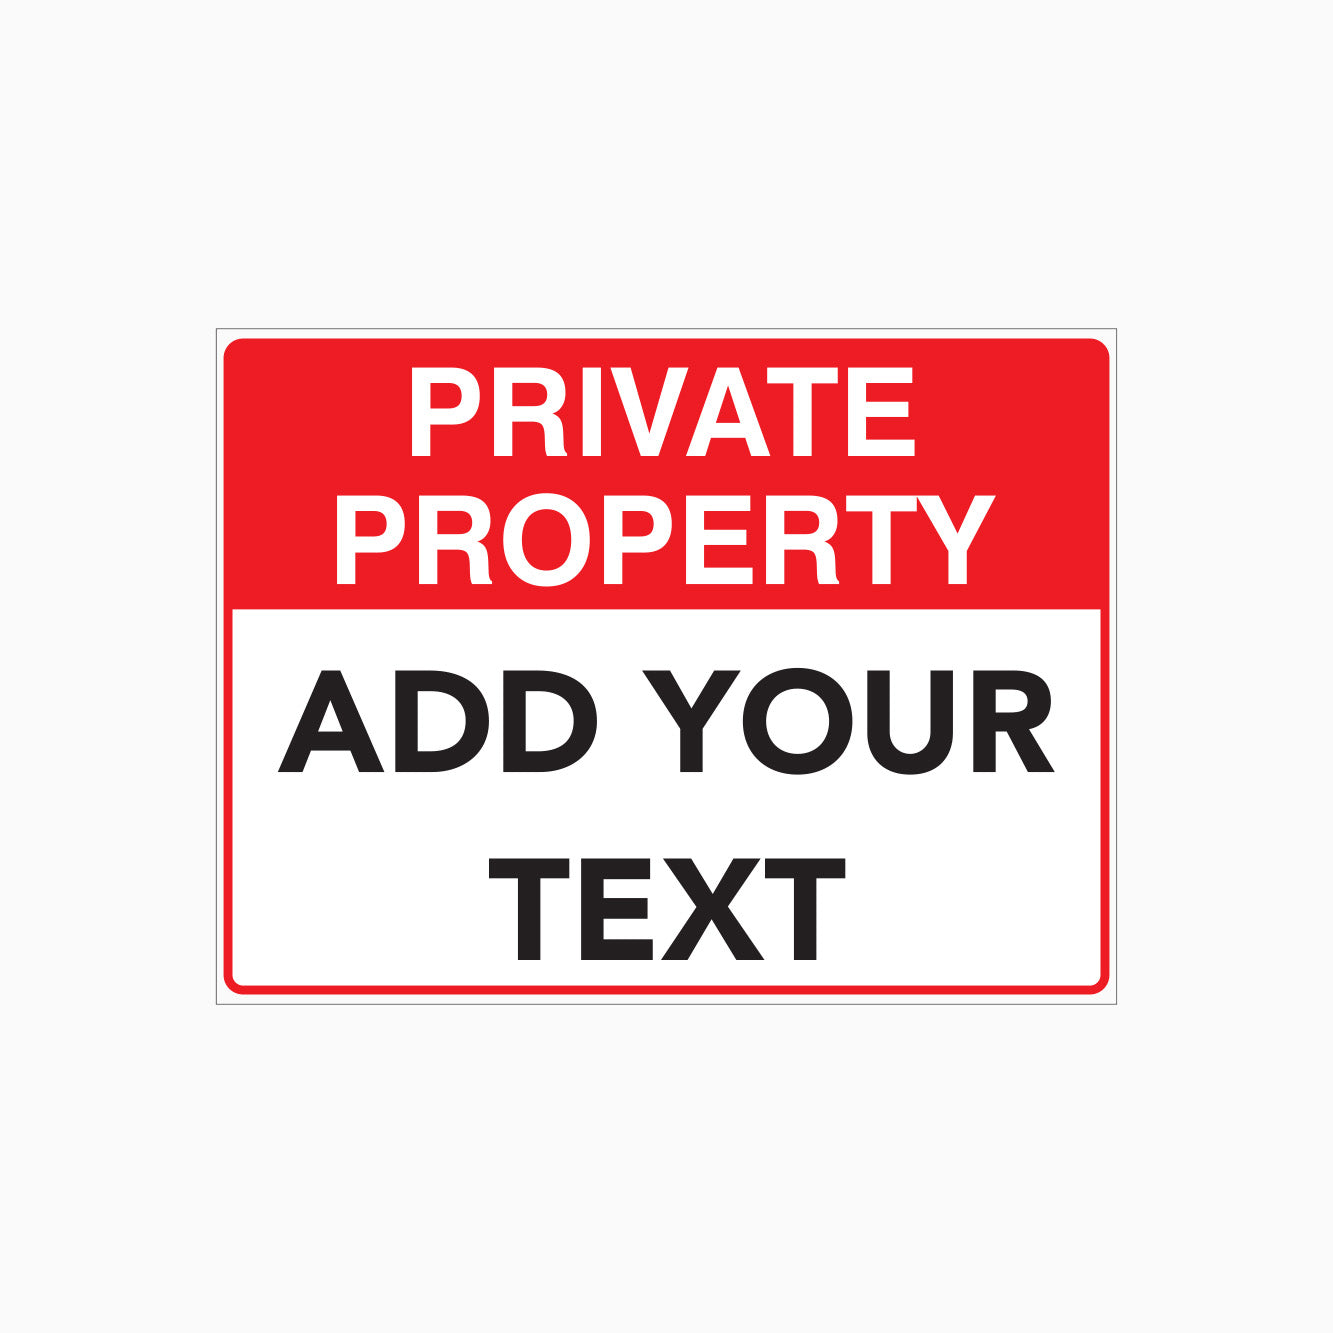 CUSTOM SIGN - PRIVATE PROPERTY SIGN